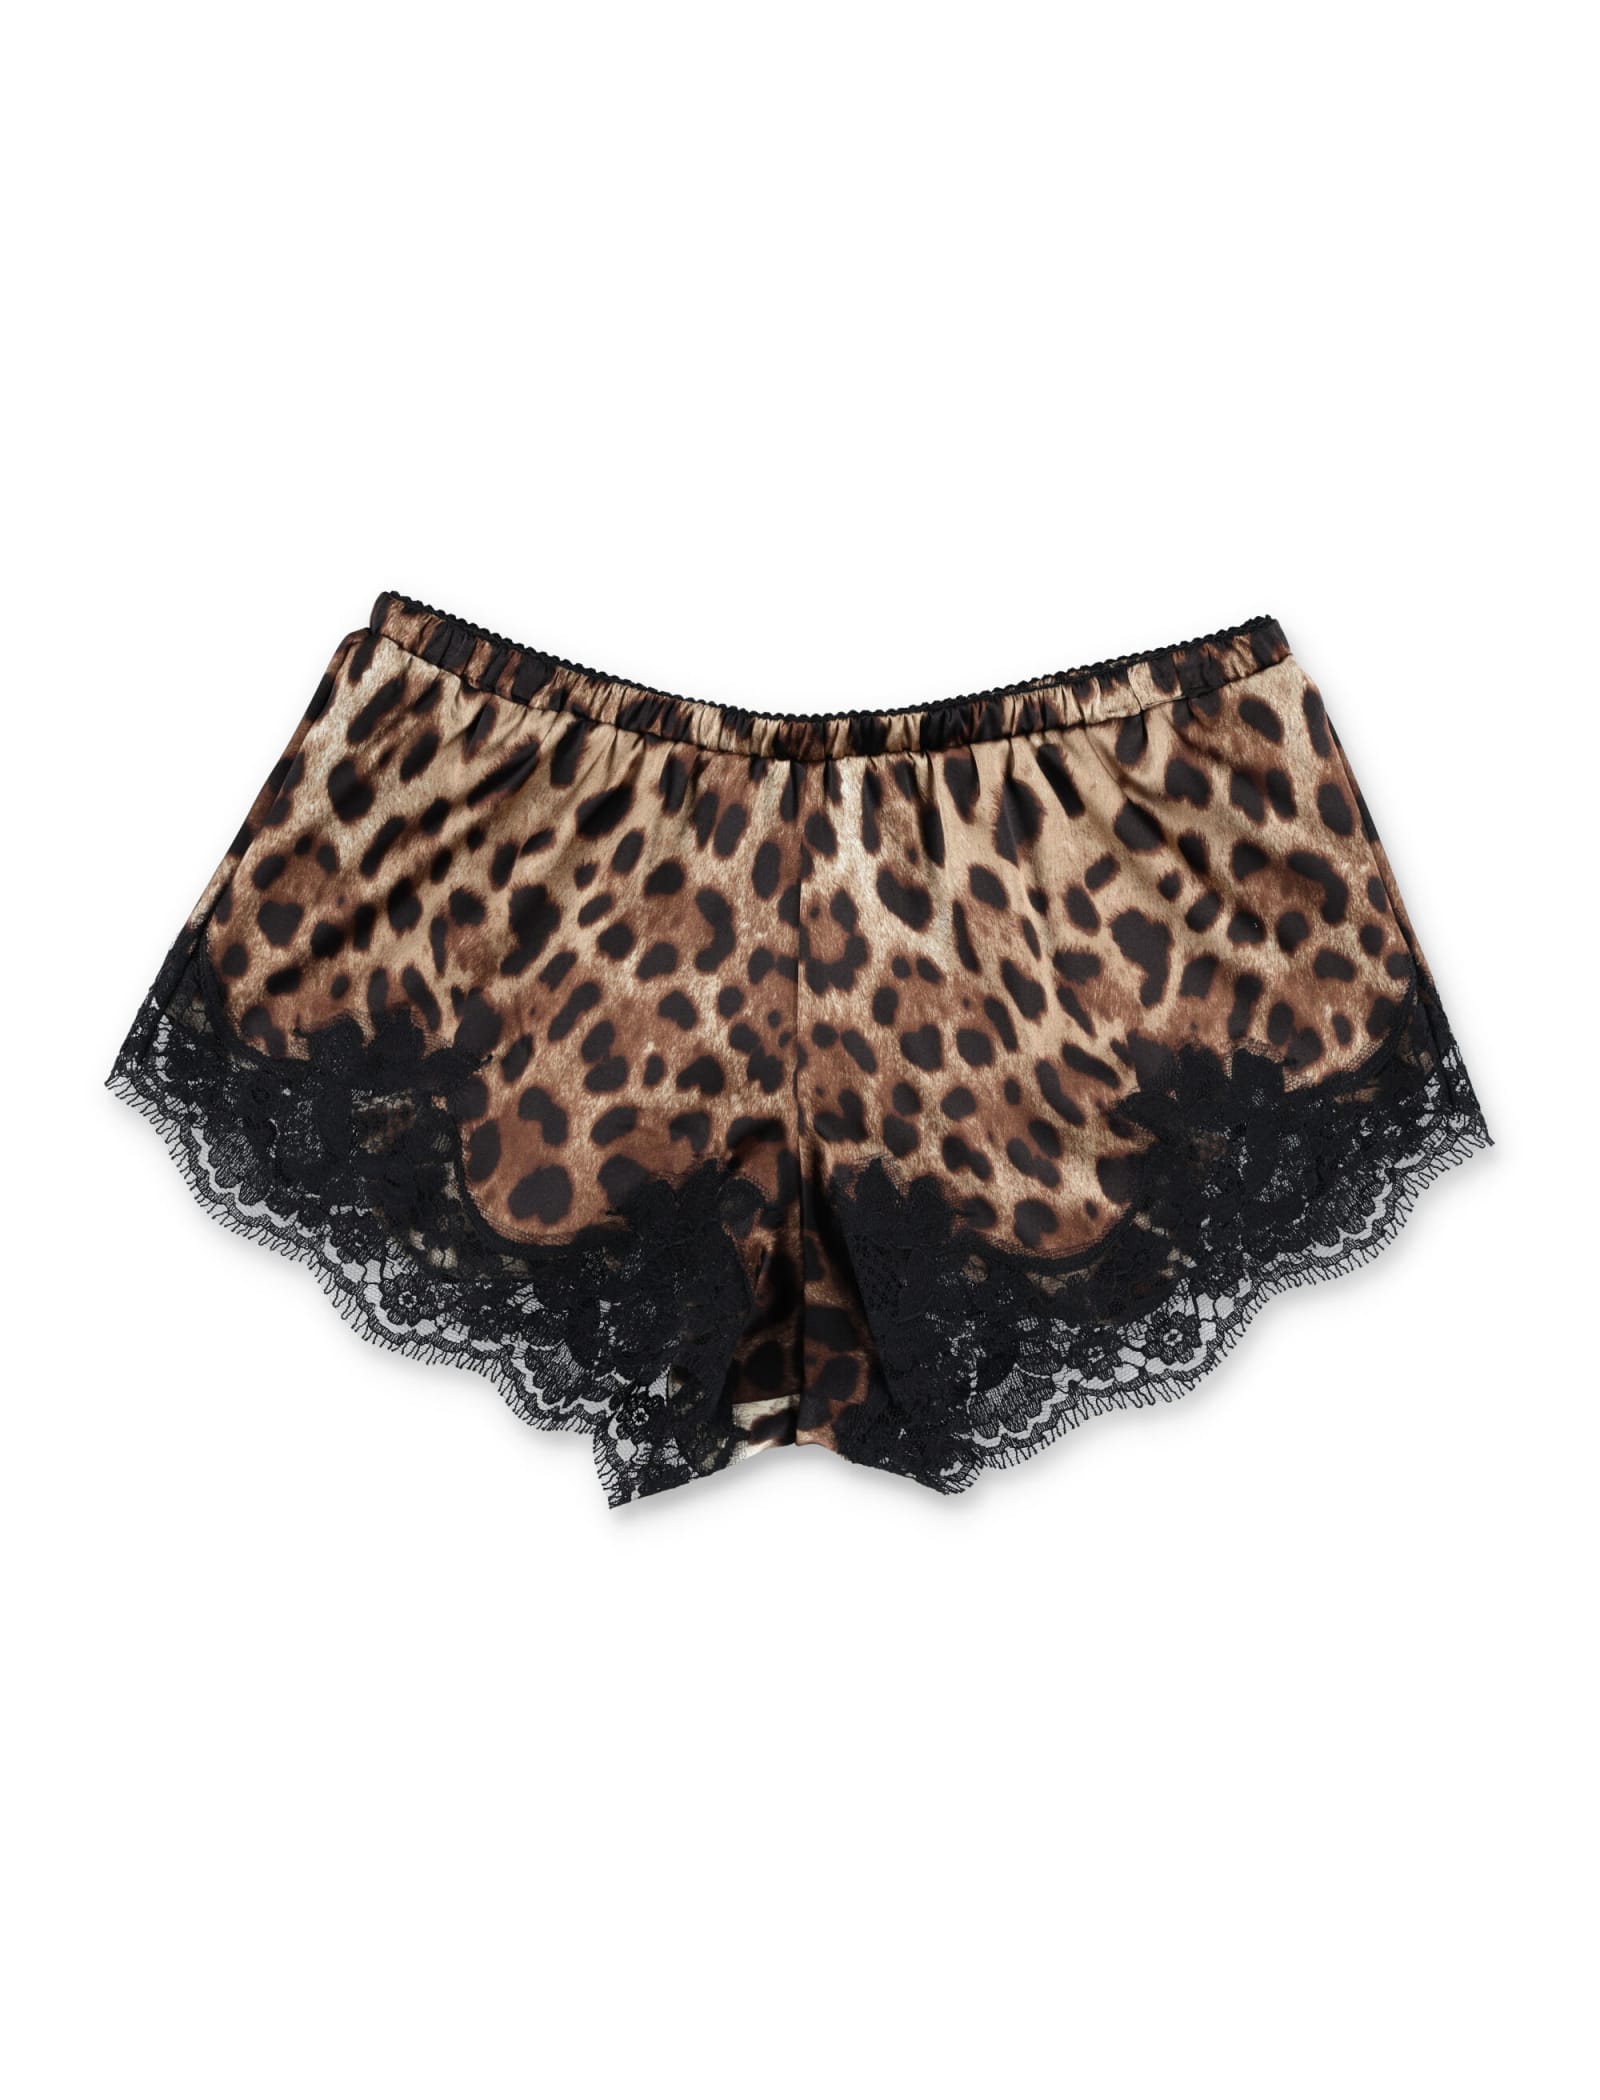 Dolce & Gabbana Leopard-print Lingerie Shorts With Lace Detailing